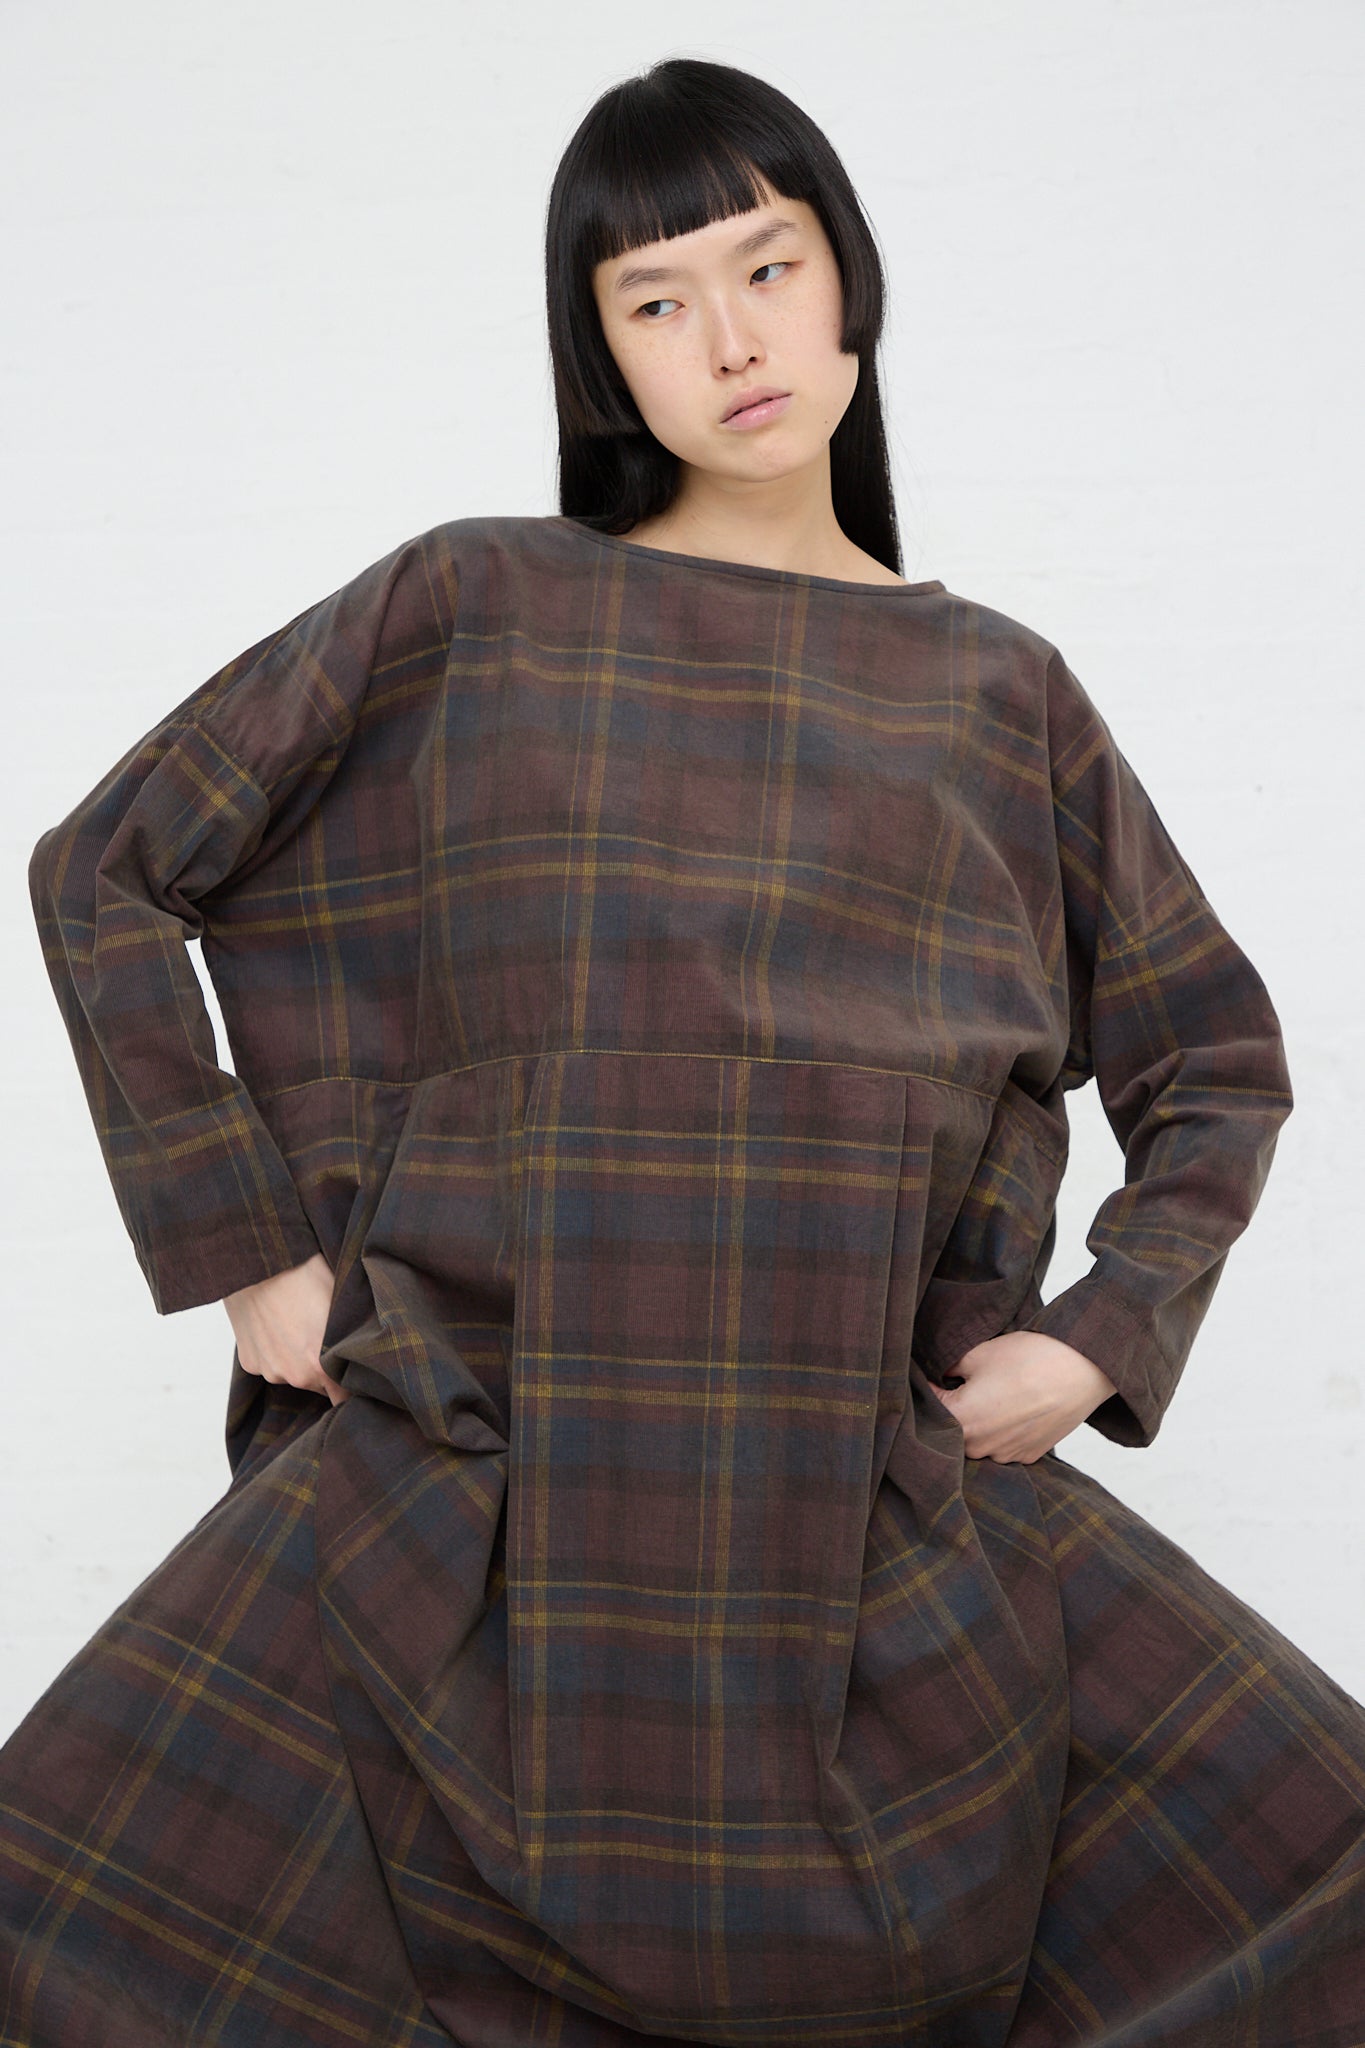 The model is wearing an Ichi woven brown plaid cotton dress.